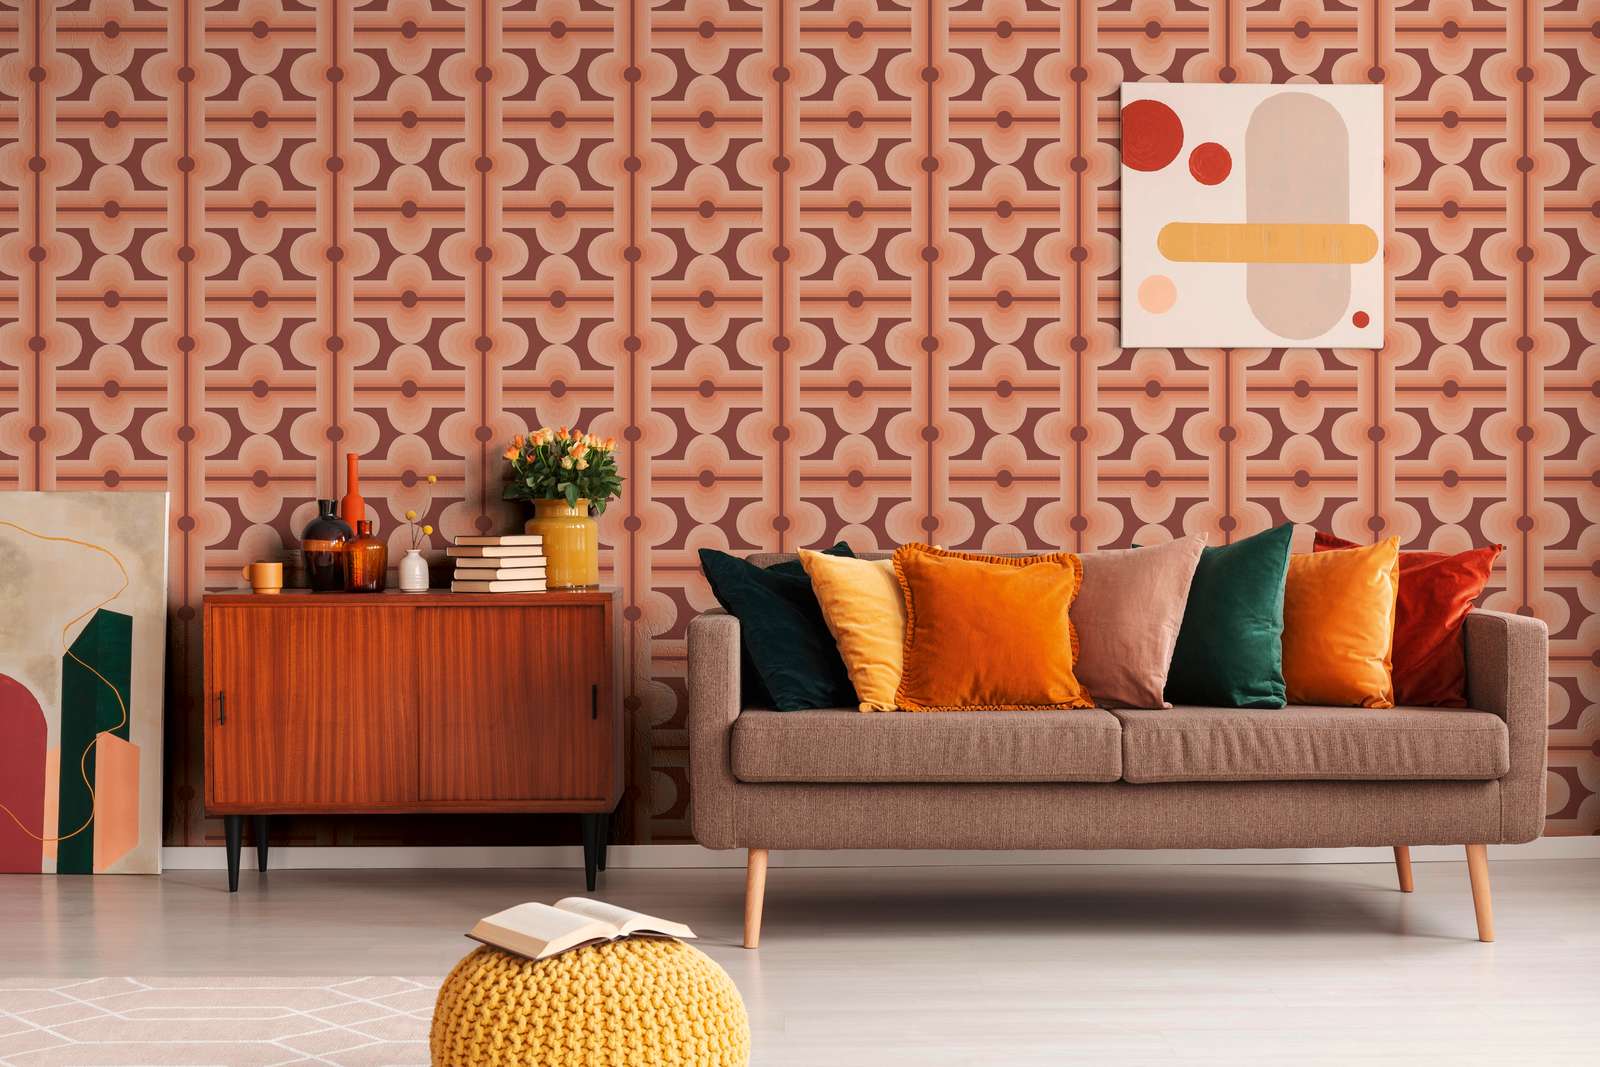             Abstract patterned non-woven wallpaper in retro style - red, orange
        